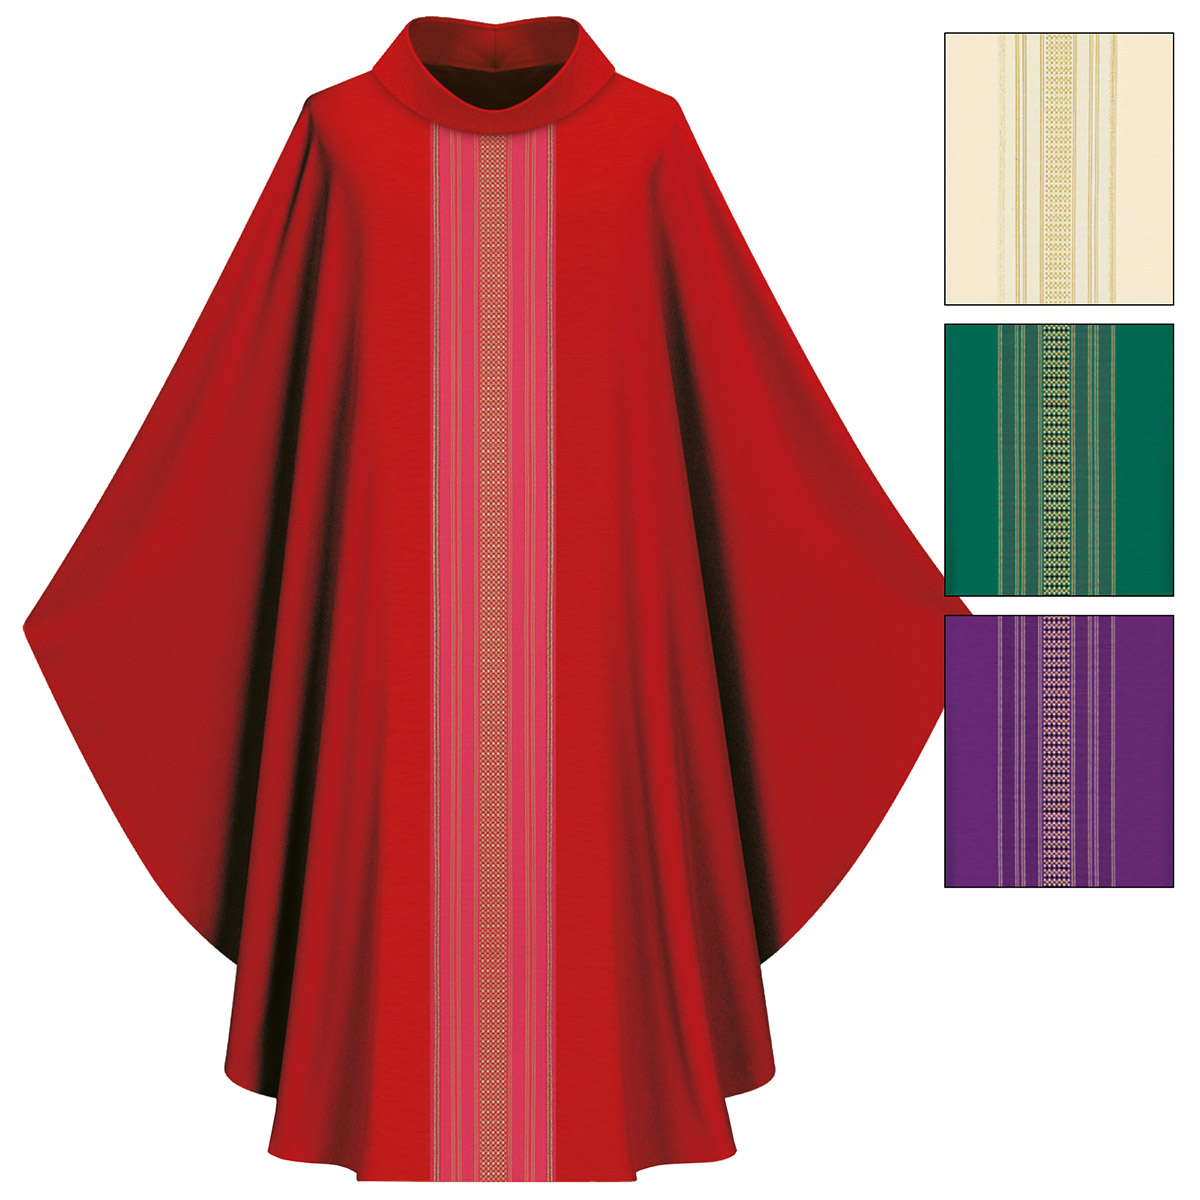 Slabbinck Gothic Chasuble with Roll Collar in Brugia Fabric